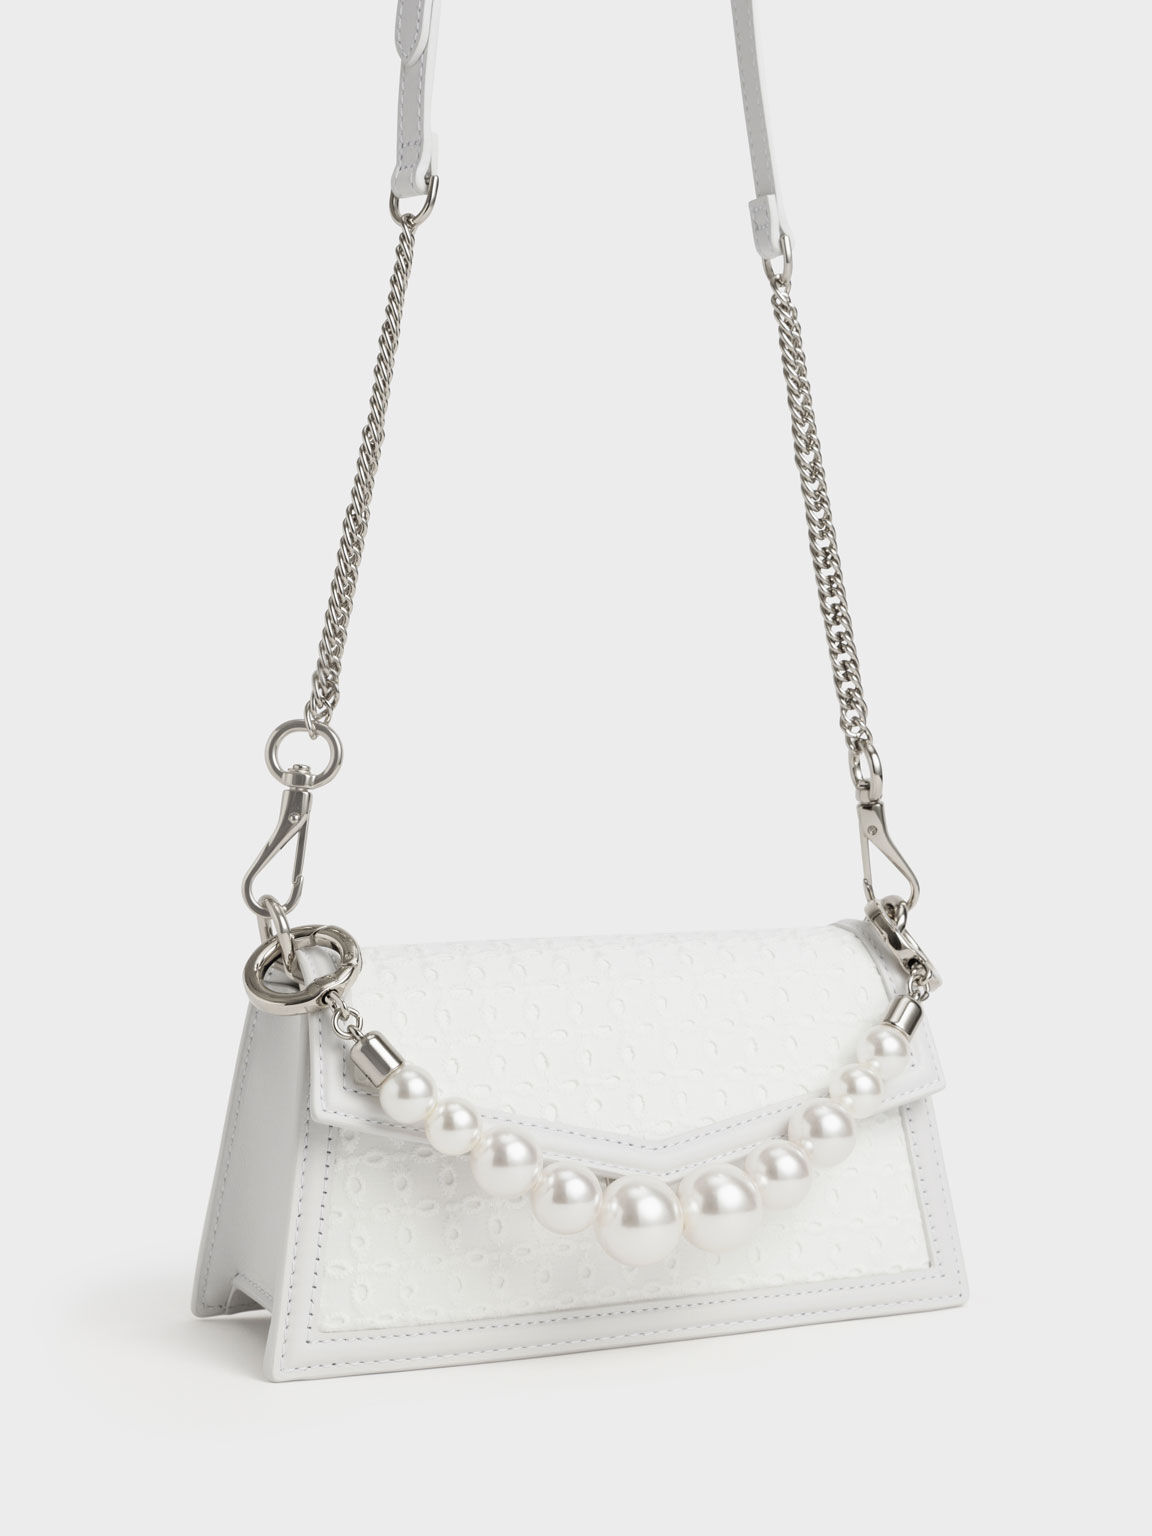 The Bridal Collection: Leather & Lace Bead-Handle Bag, White, hi-res